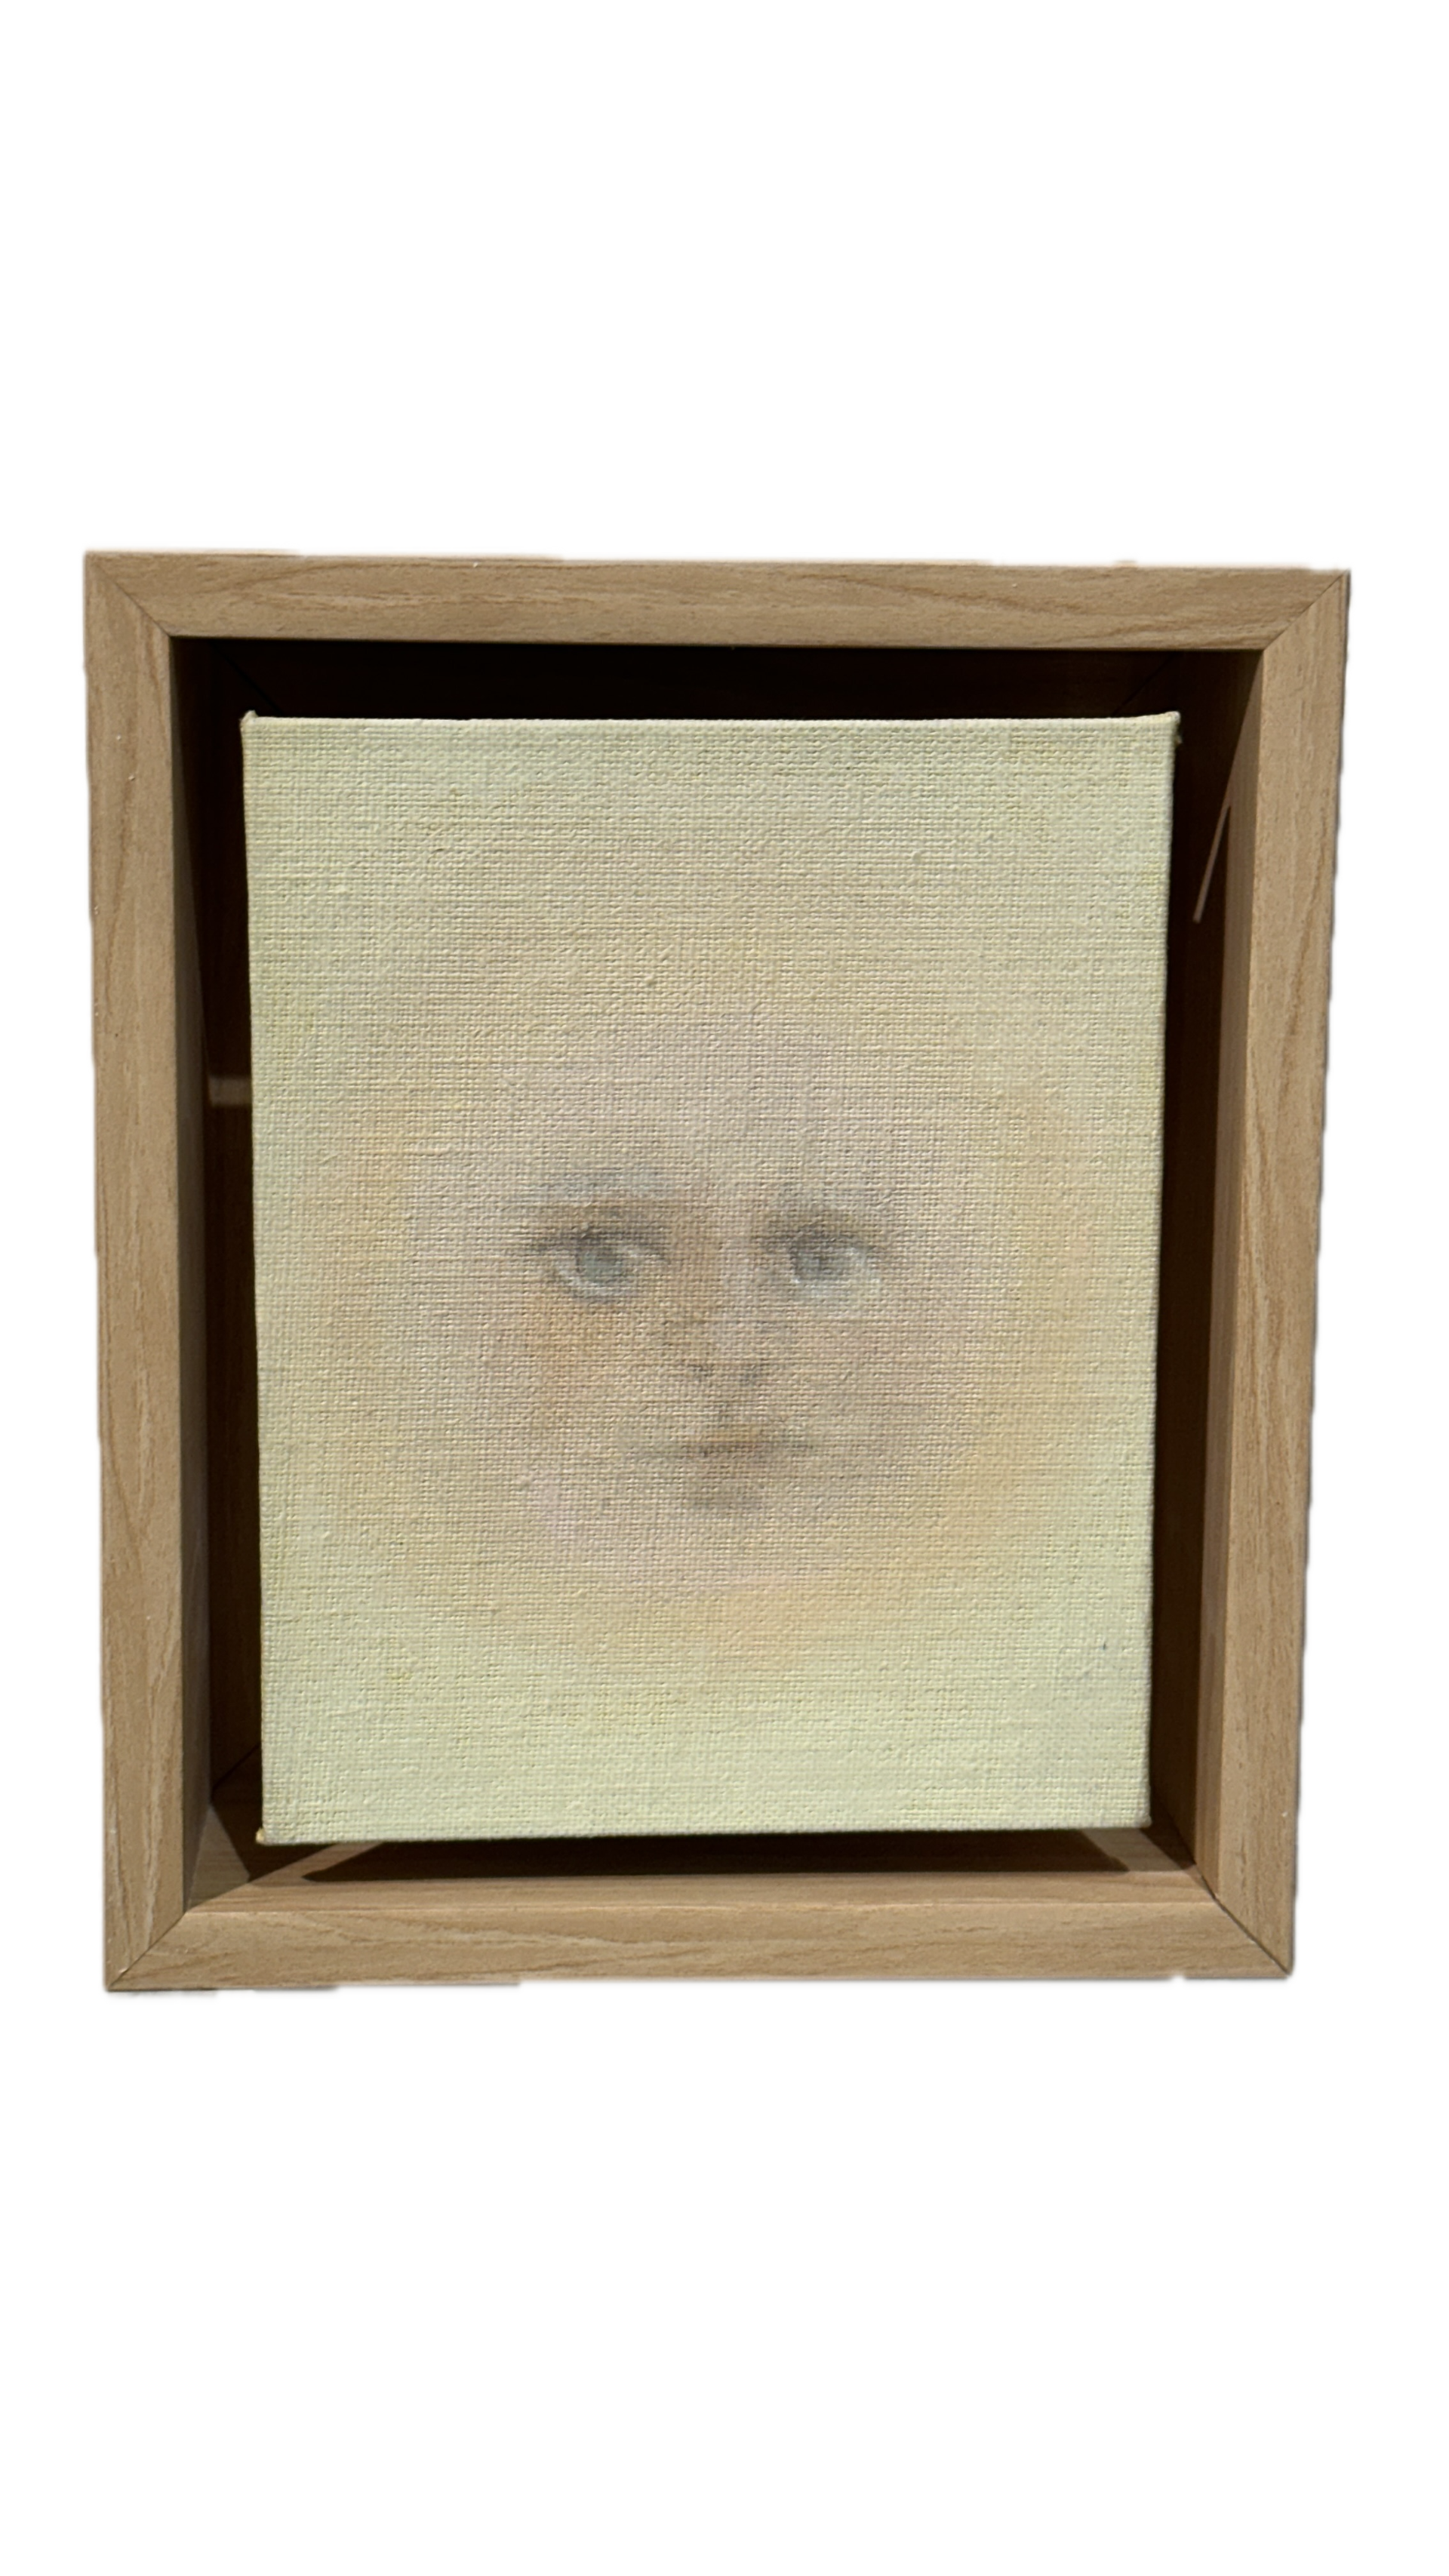 Moonface - pale pink on pale yellow by Leila McConnell